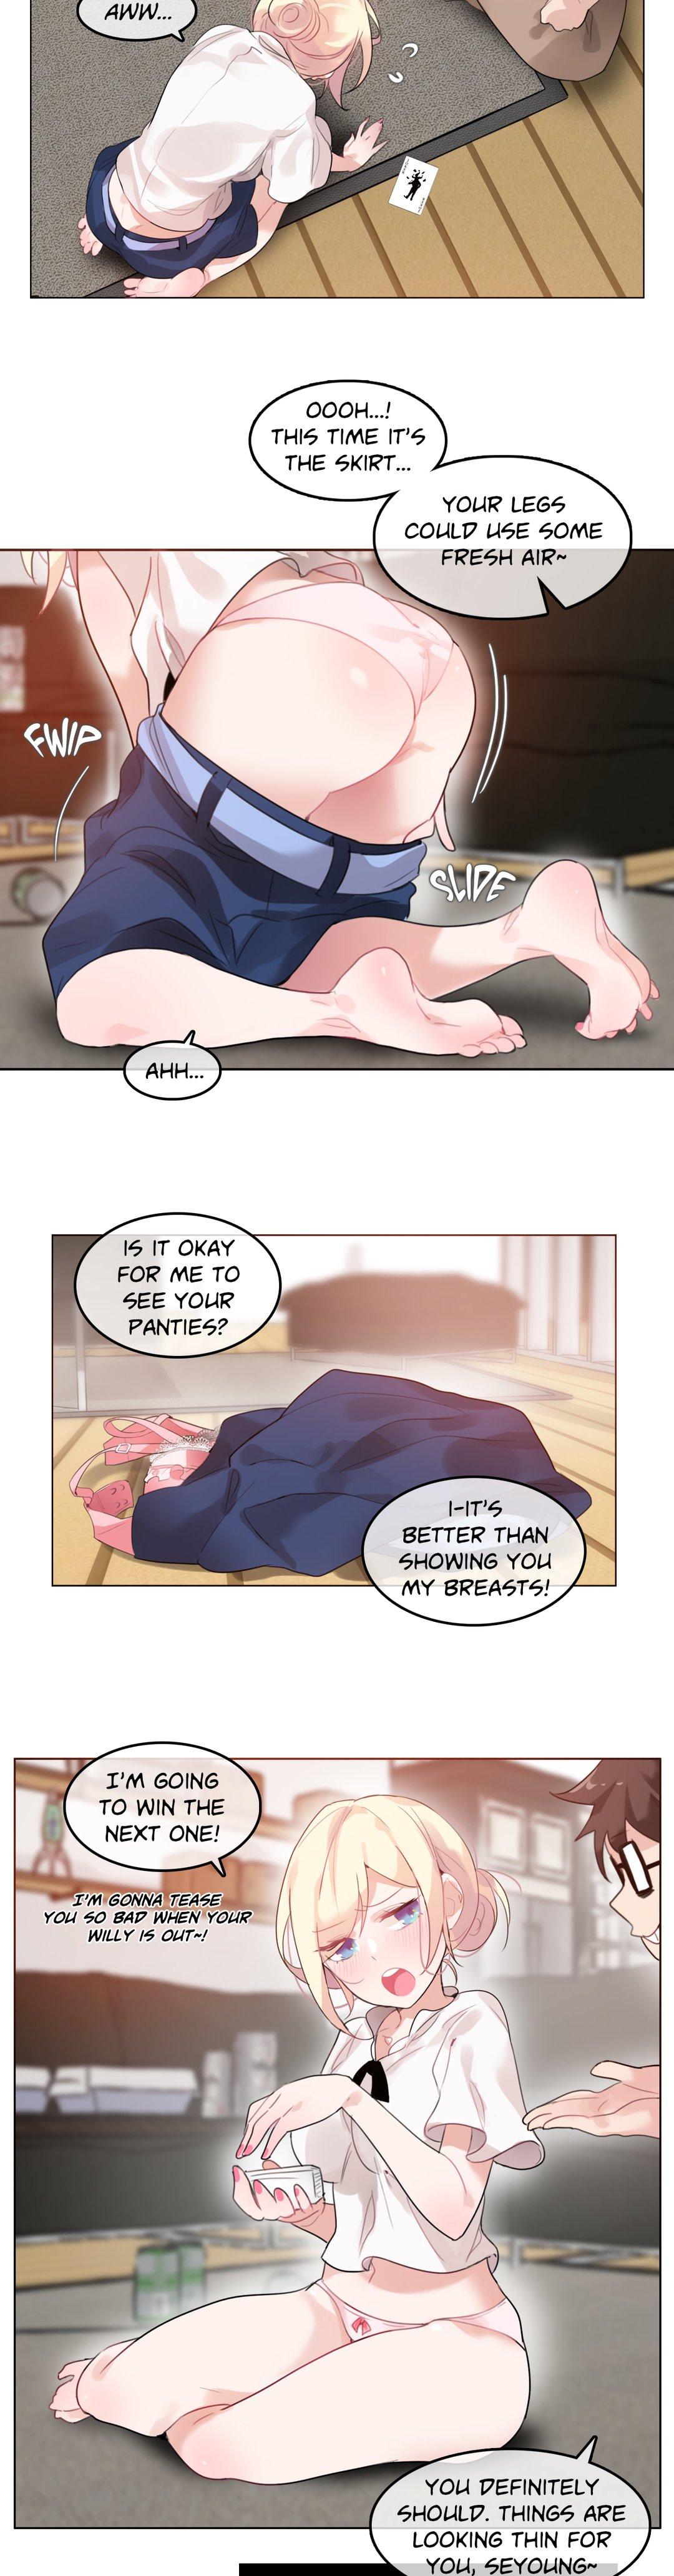 A Pervert's Daily Life • Chapter 31-35 82